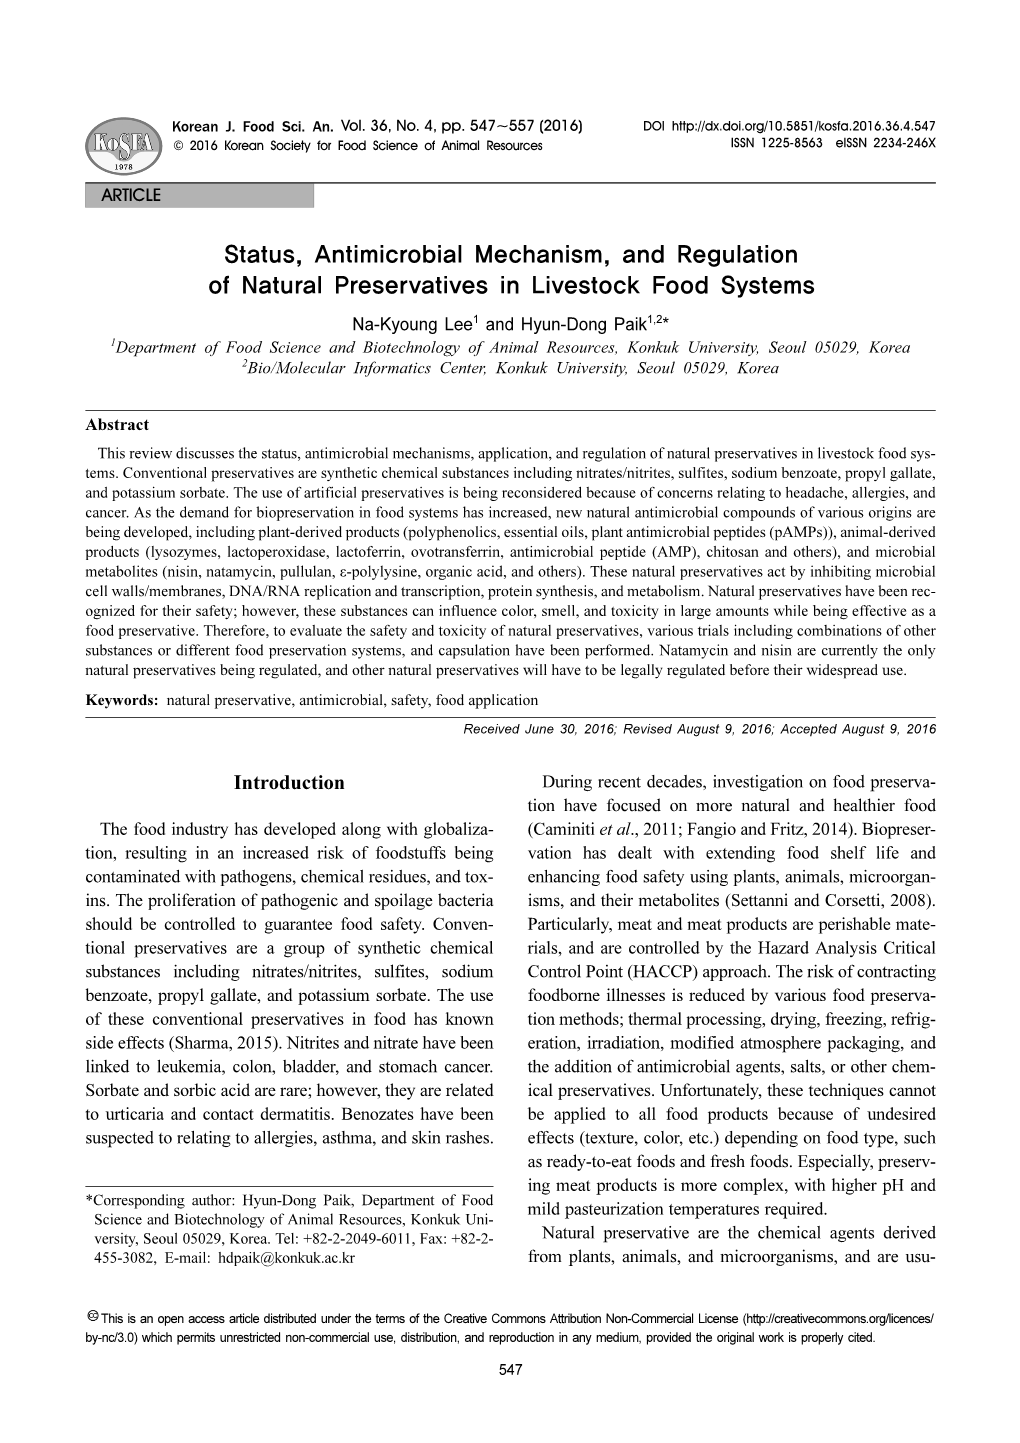 Status, Antimicrobial Mechanism, and Regulation of Natural Preservatives in Livestock Food Systems